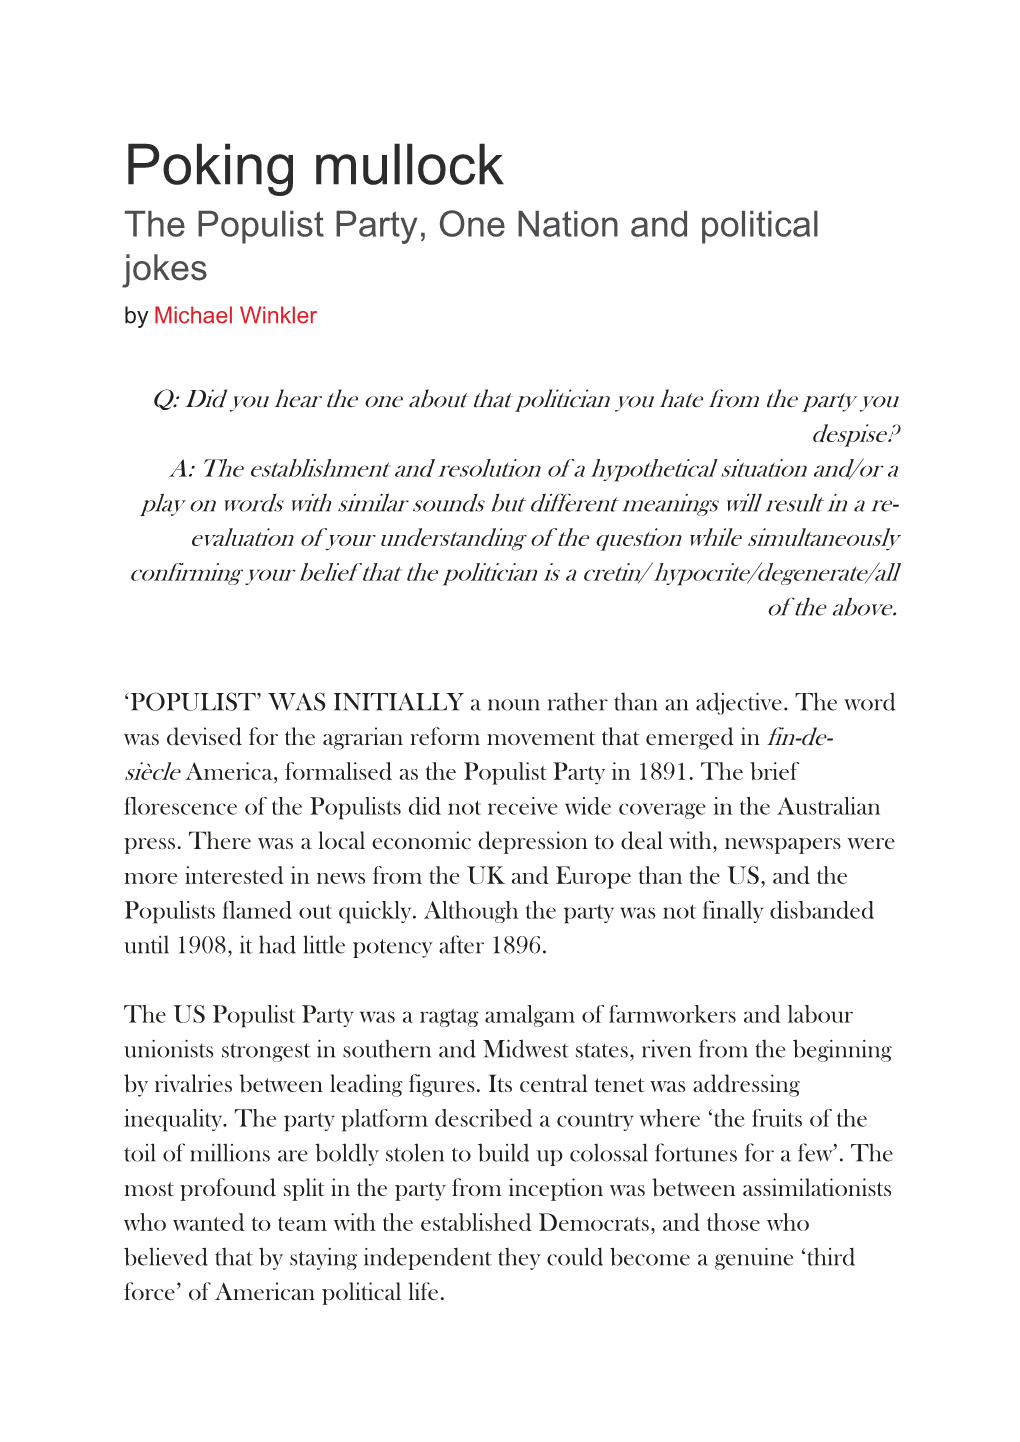 Poking Mullock the Populist Party, One Nation and Political Jokes by Michael Winkler